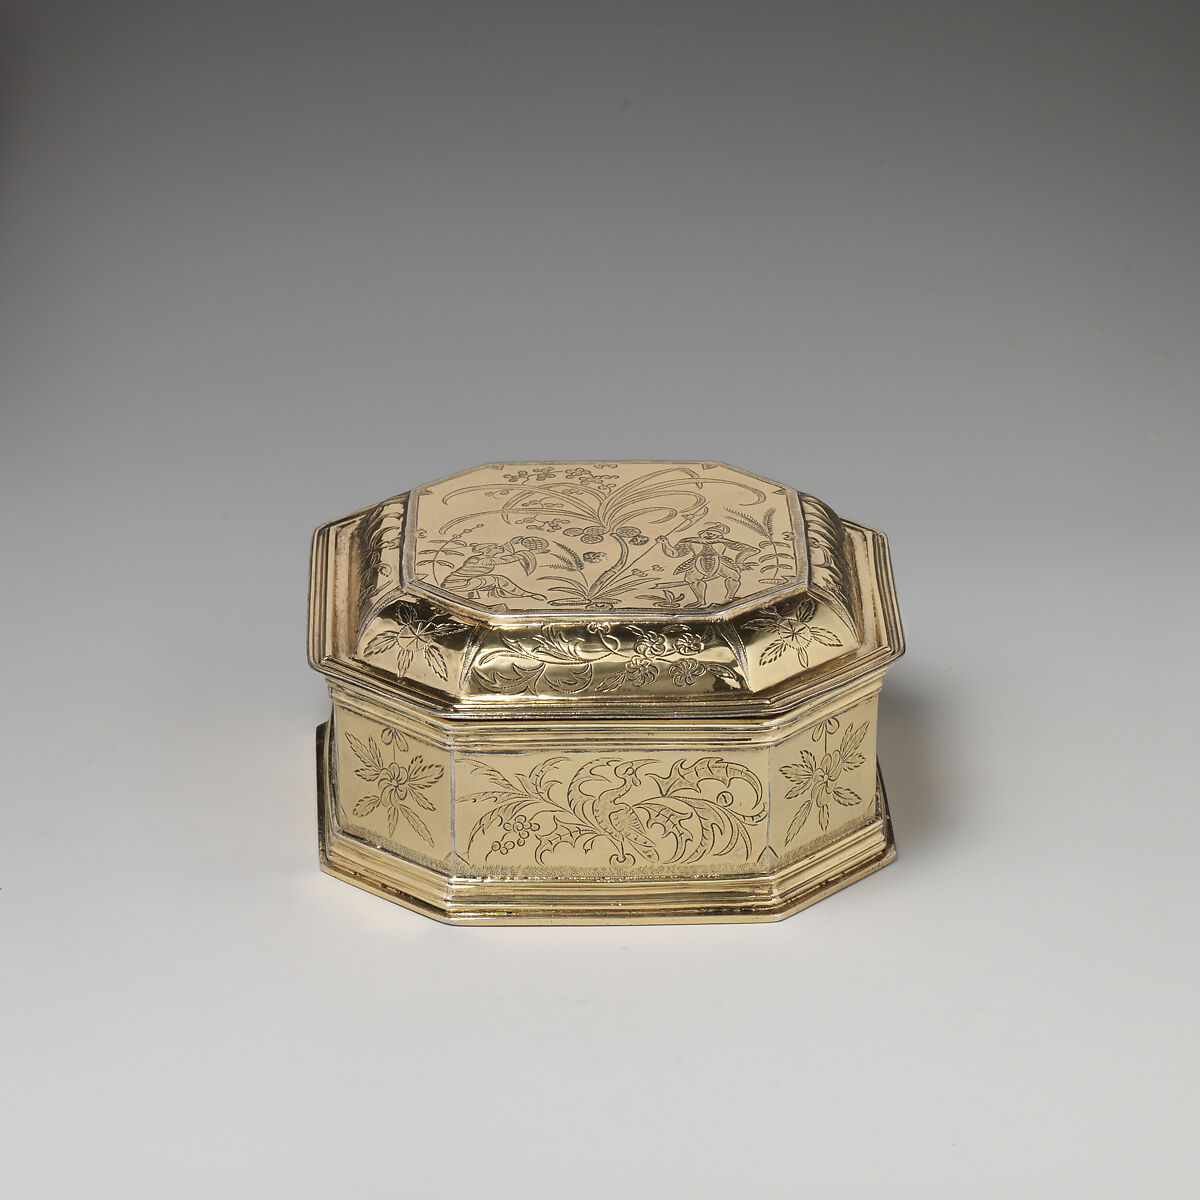 Box with cover (one of a pair) (part of a toilet service), William Fowle, Silver gilt, British, London